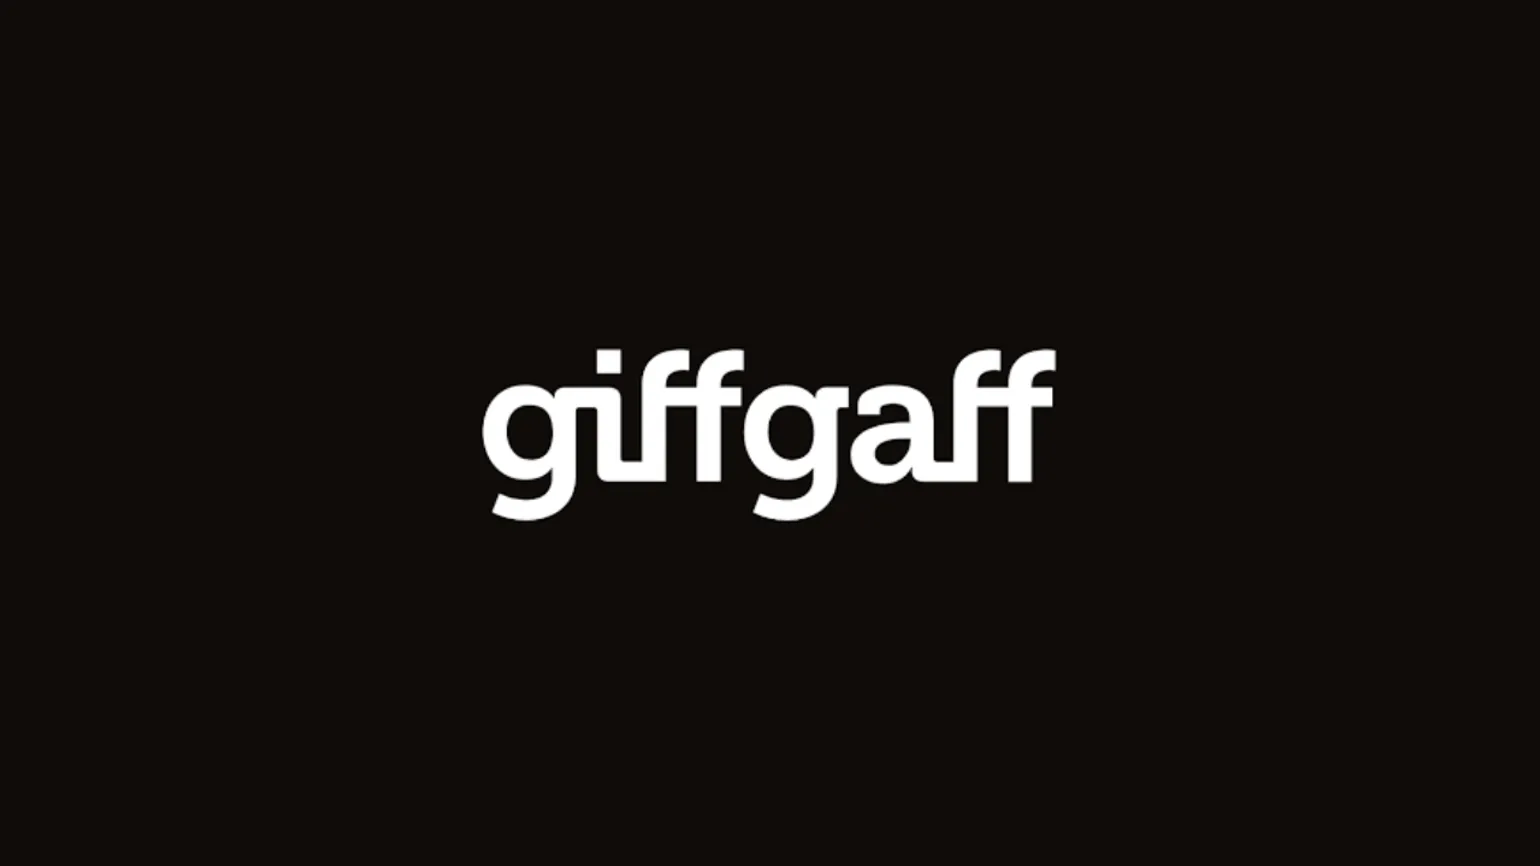 Giffgaff to reduce EU roaming fair usage policy from 20GB to 5GB data per month